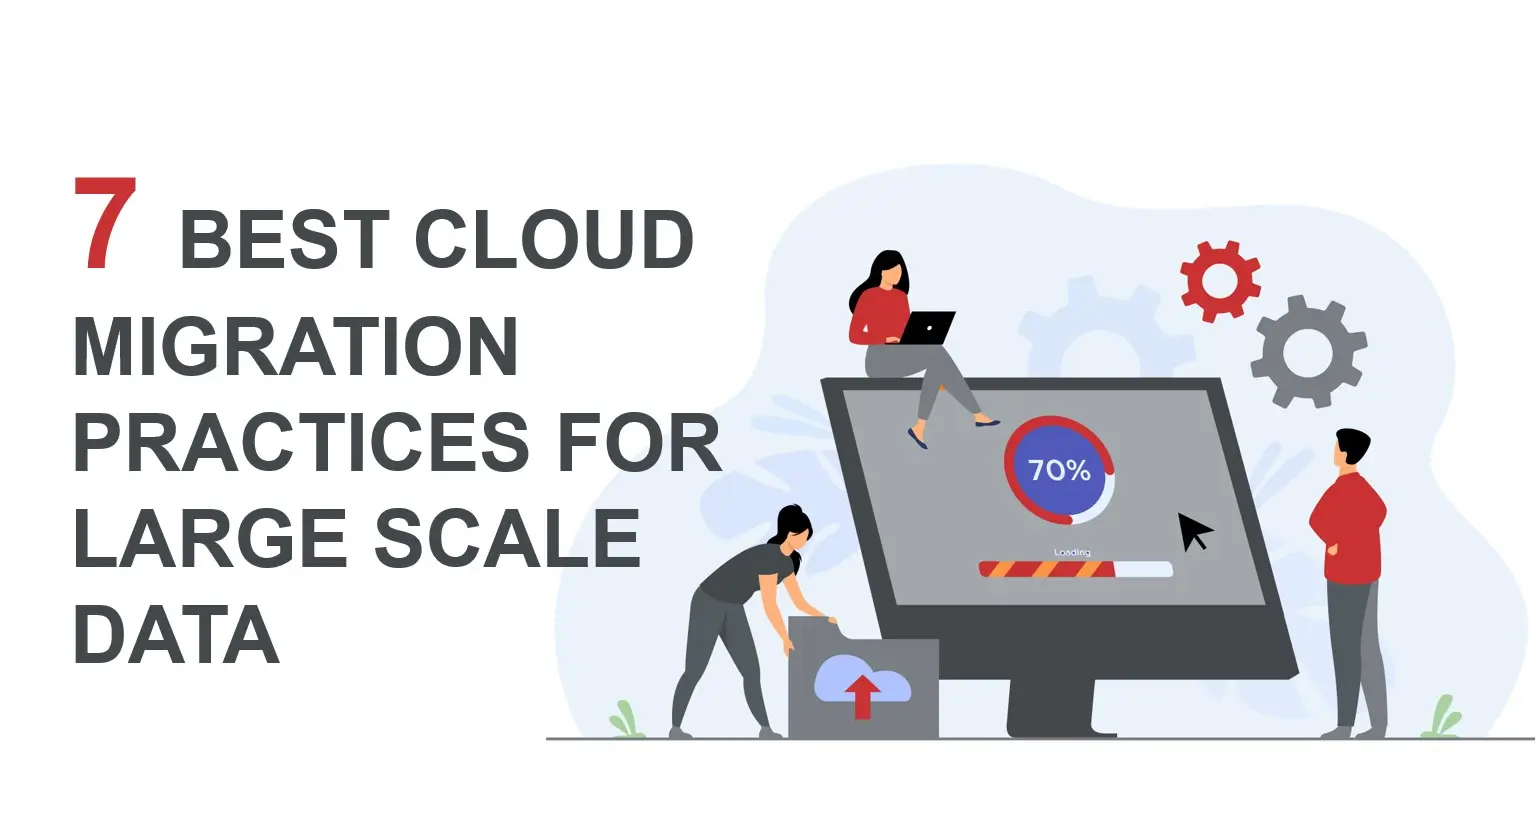 7 Best Cloud Migration Practices For Large Scale Data